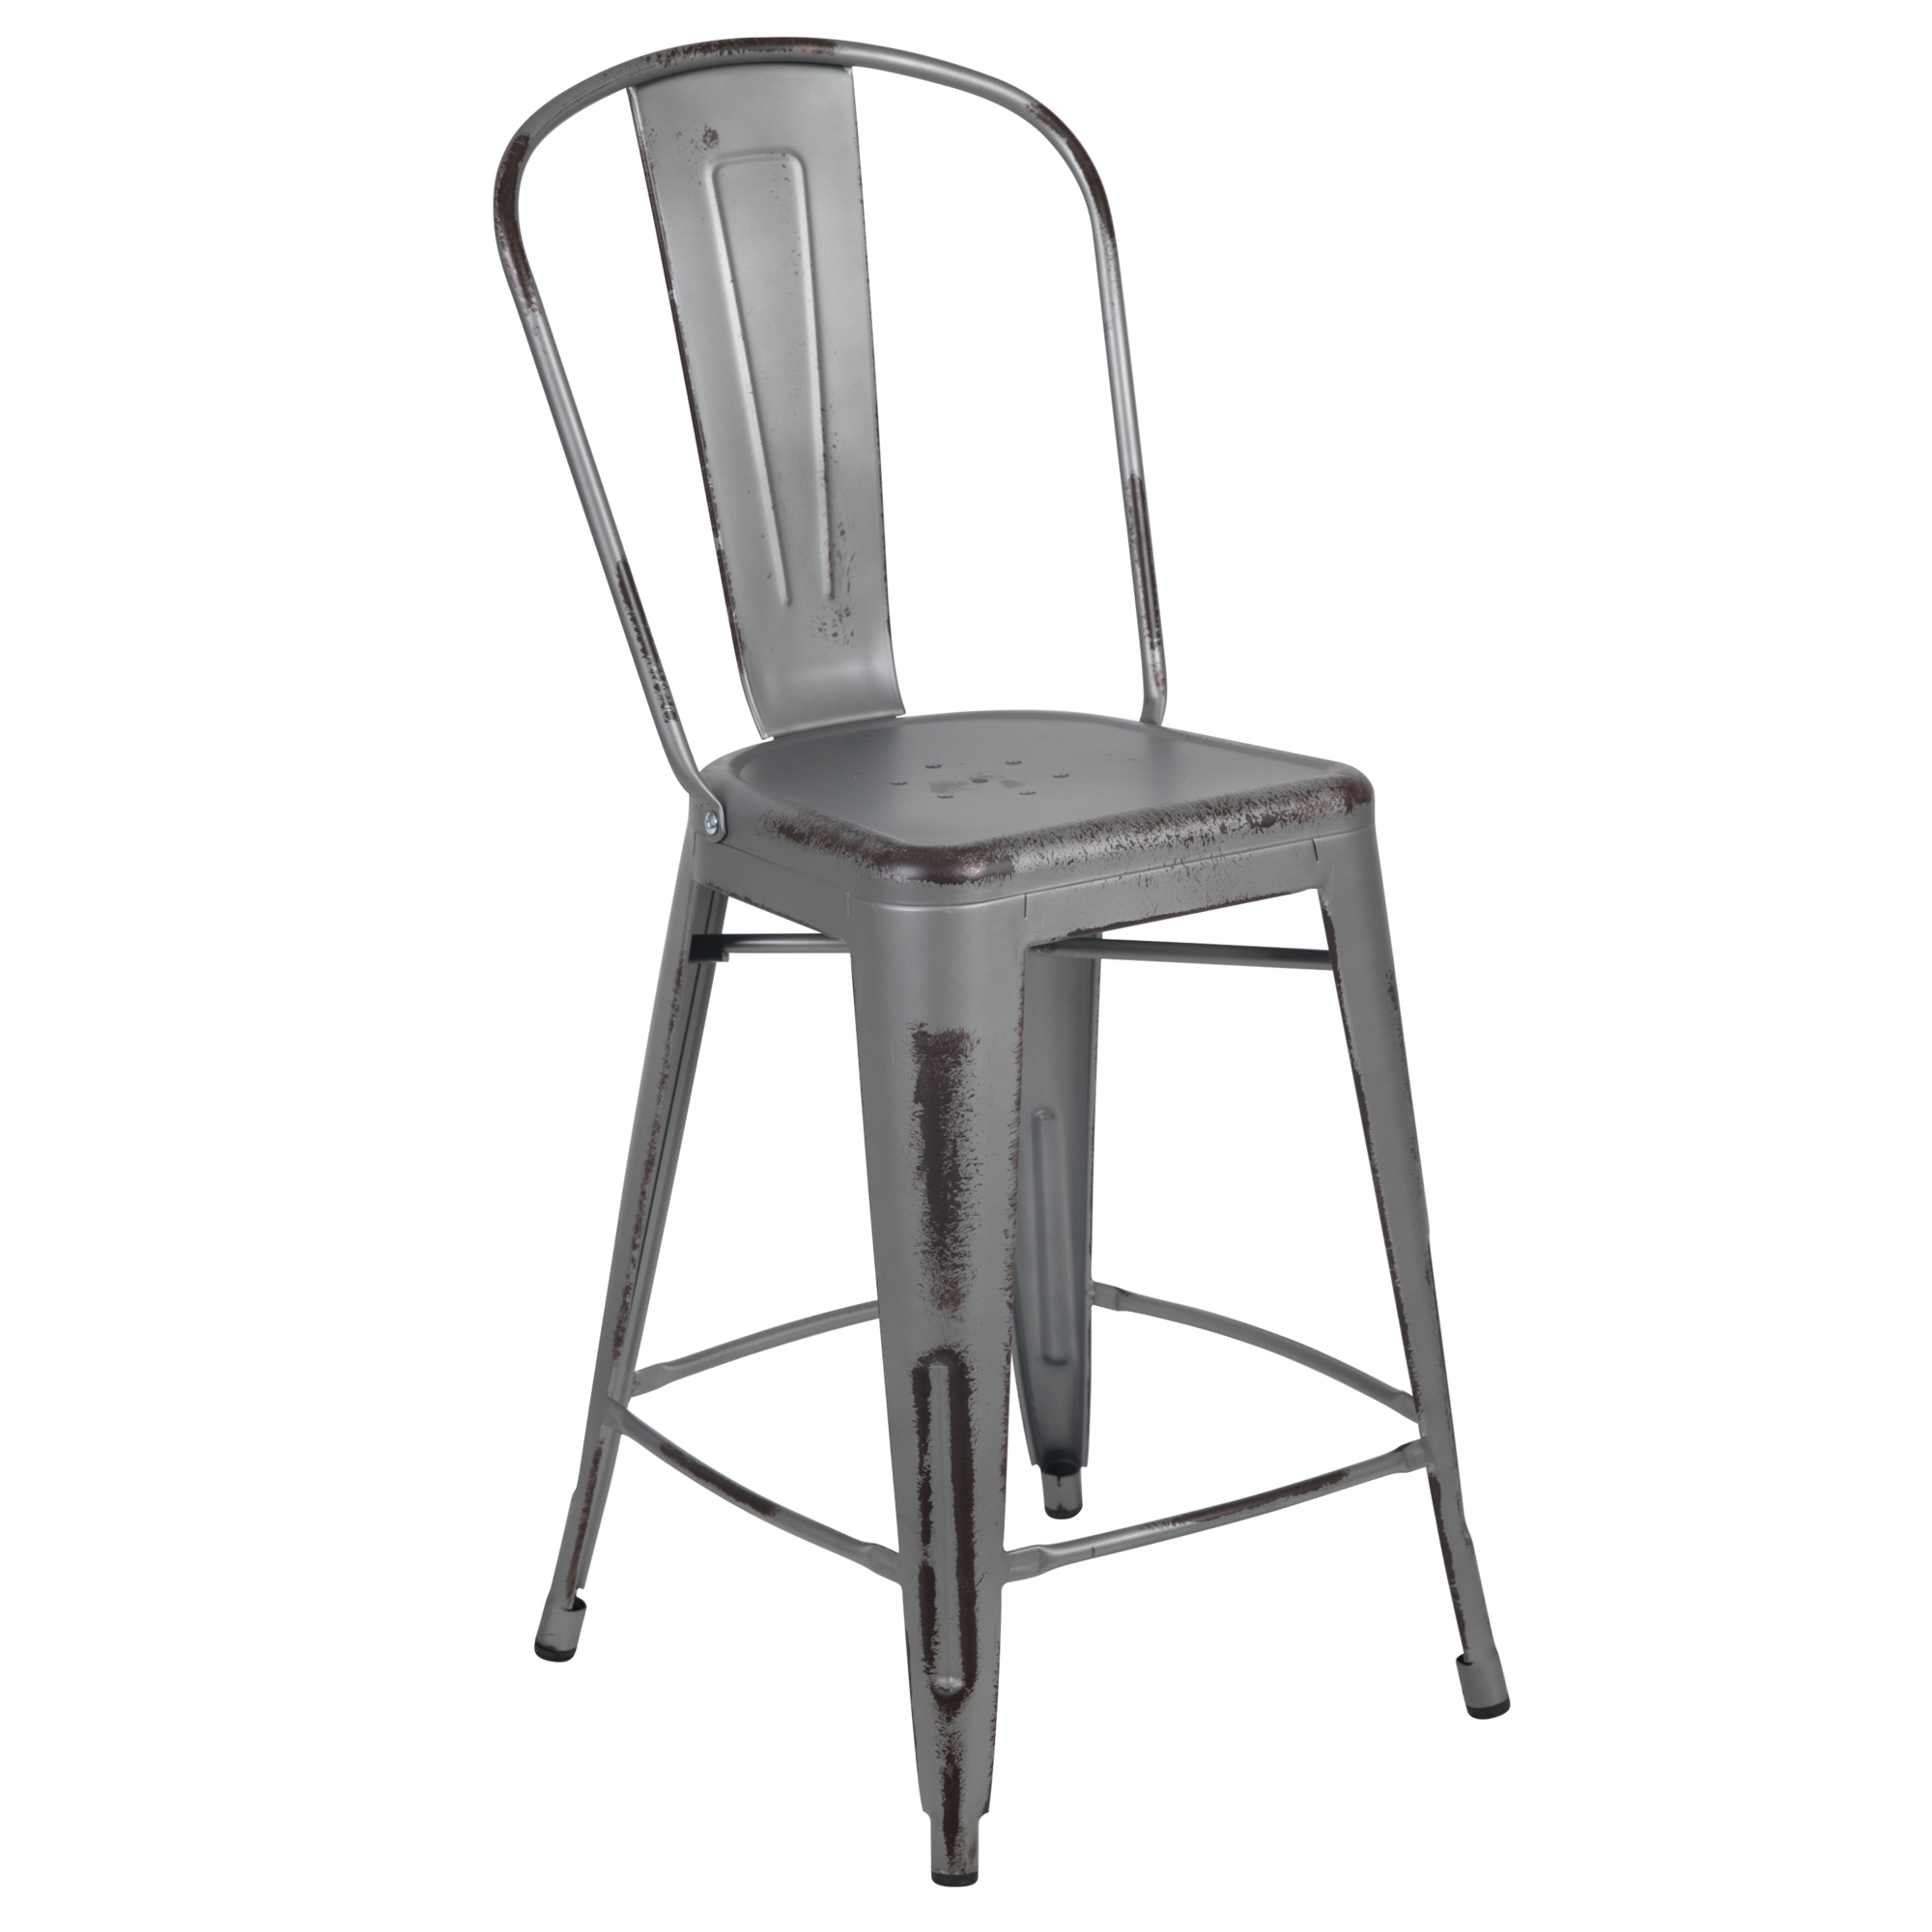 Flash Furniture, 24Inch H Distressed Silver Indoor-Outdoor Counterstool, Primary Color Gray, Included (qty.) 1, Model ET353424SIL